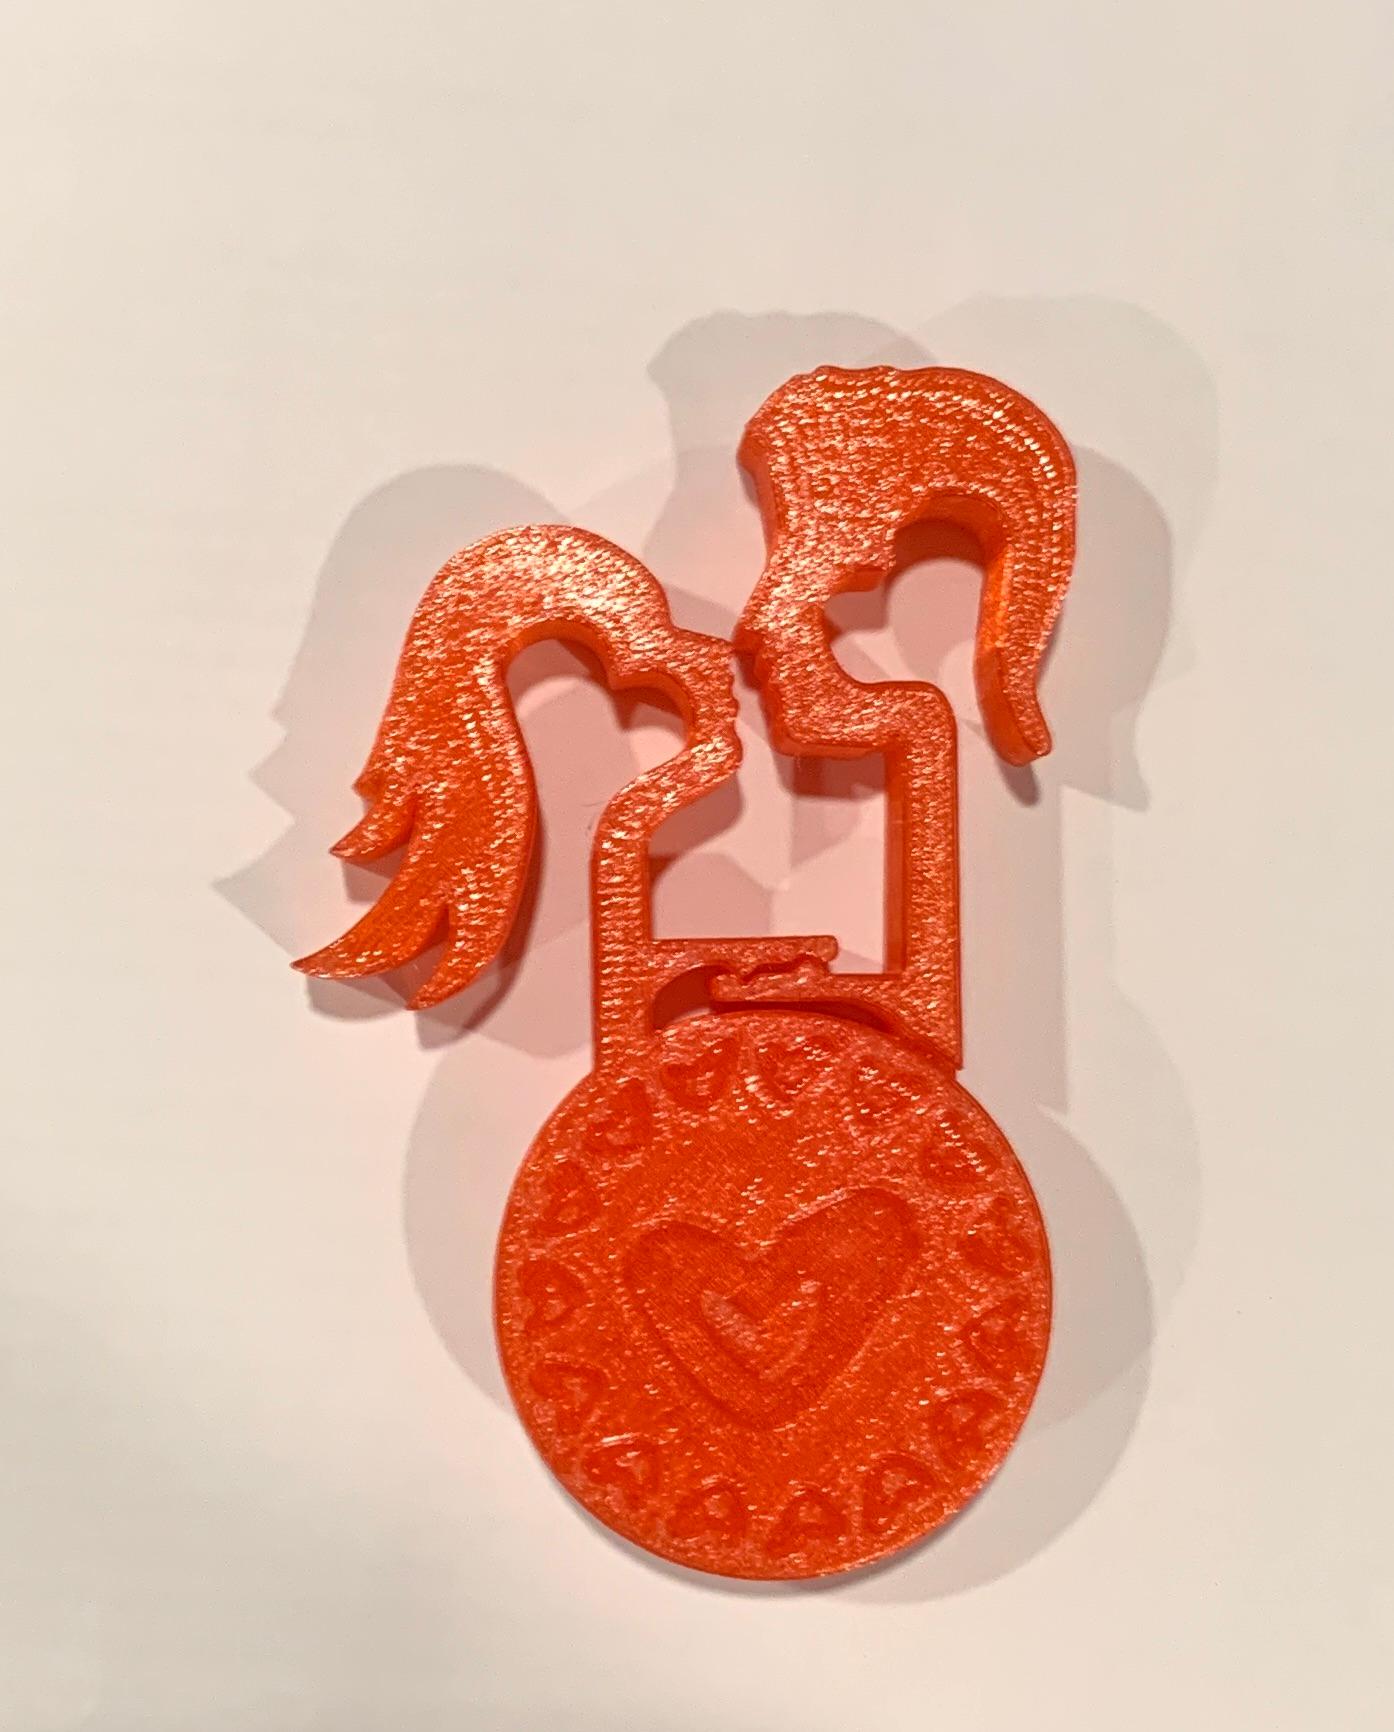 Valentine's Spinning Lock (Remix of Blank Love Locks for Remixing) - Printed in translucent red PLA with gyroid infill - 3d model